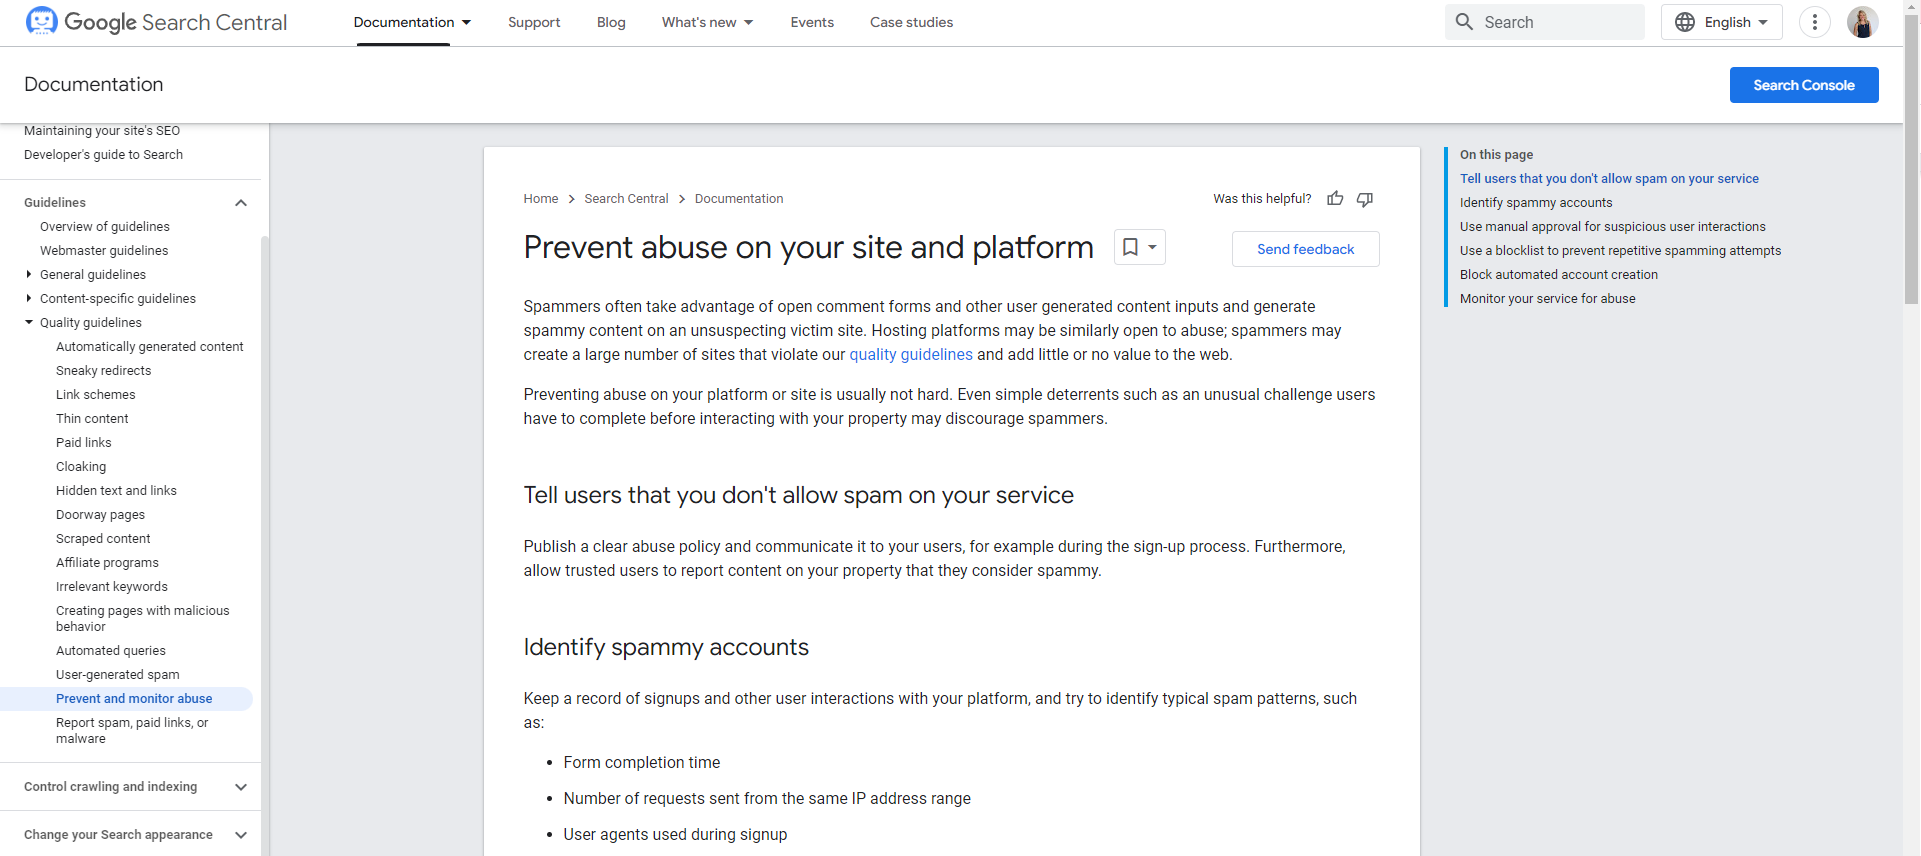 Google updates content on preventing abuse in Search Central.